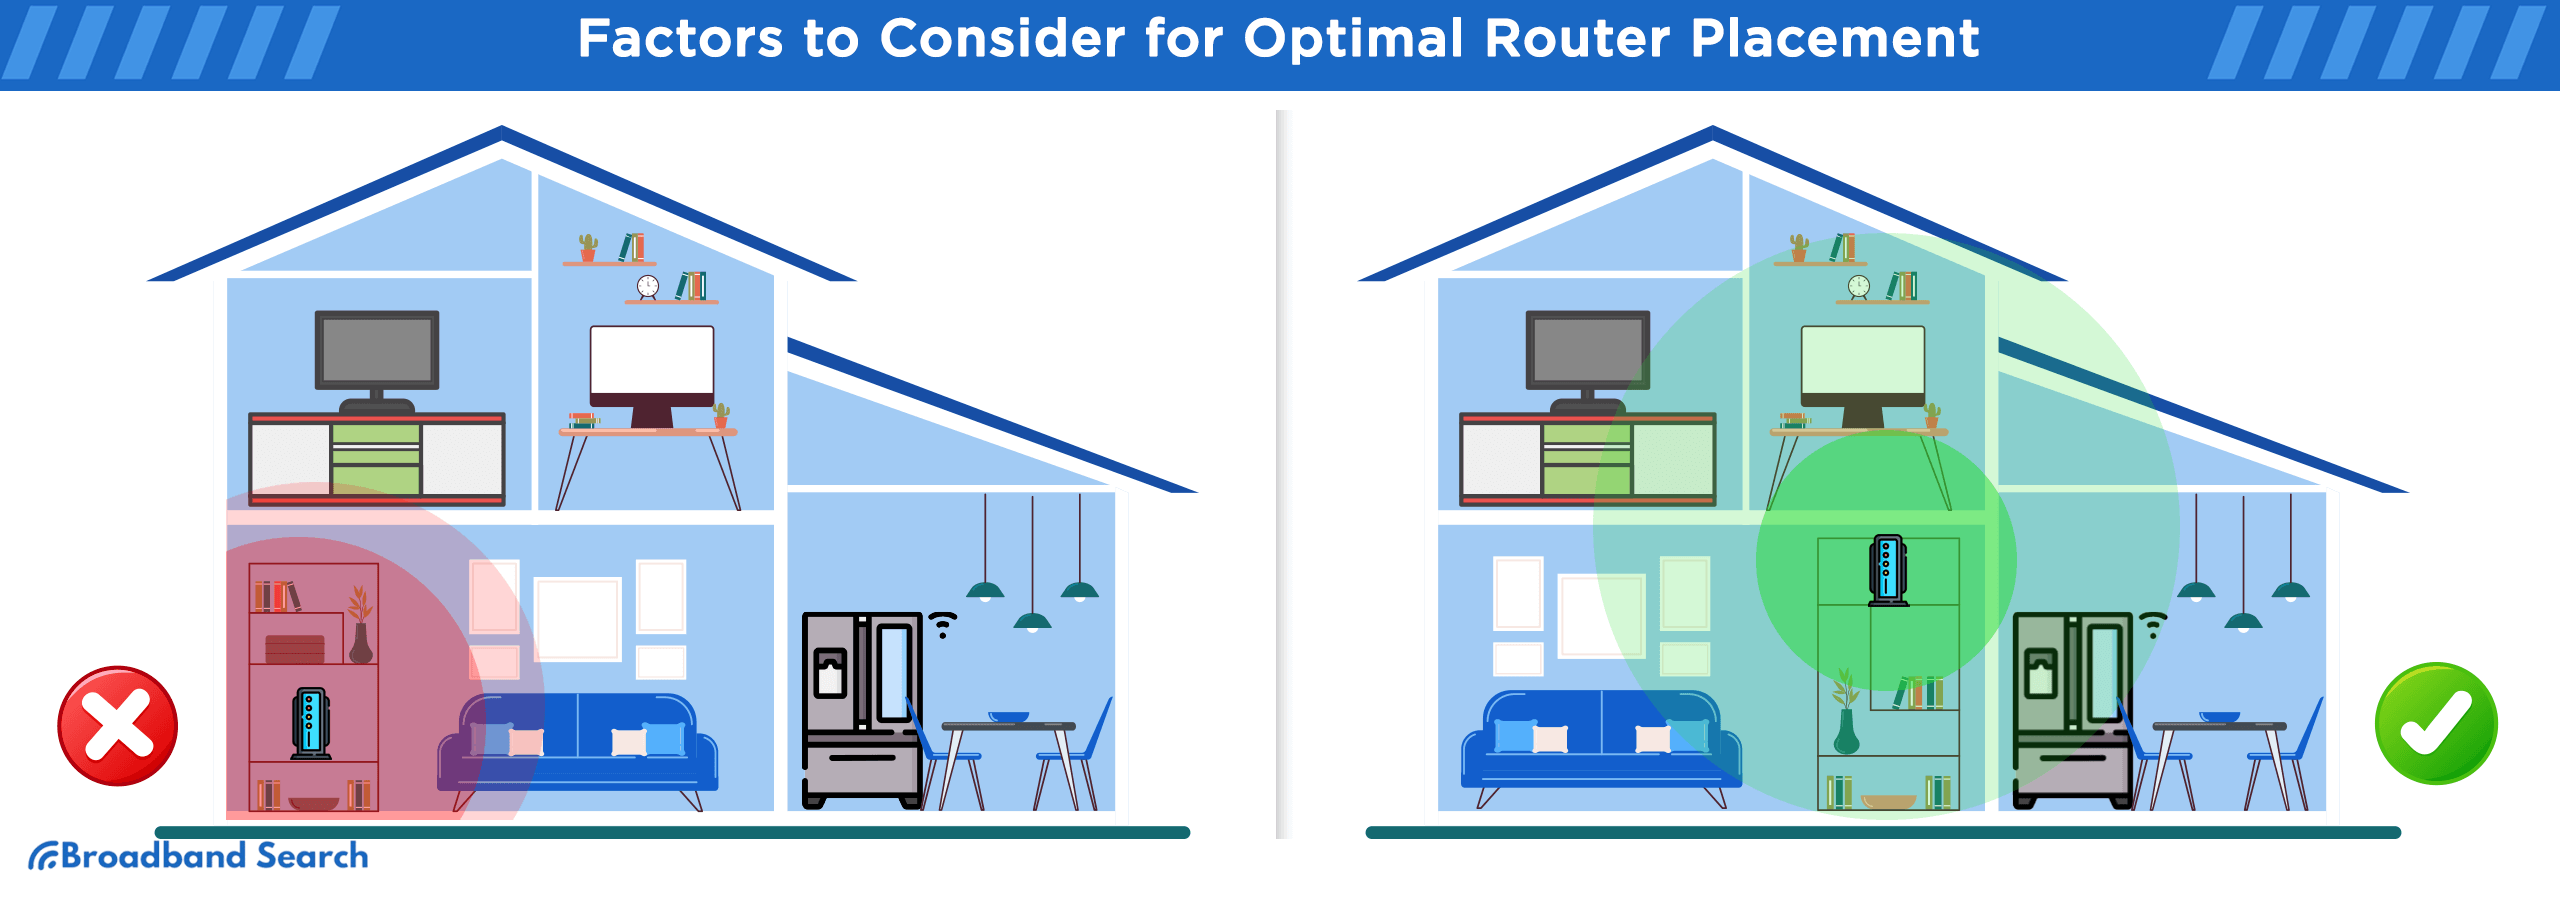 factors to consider for optimal router placement